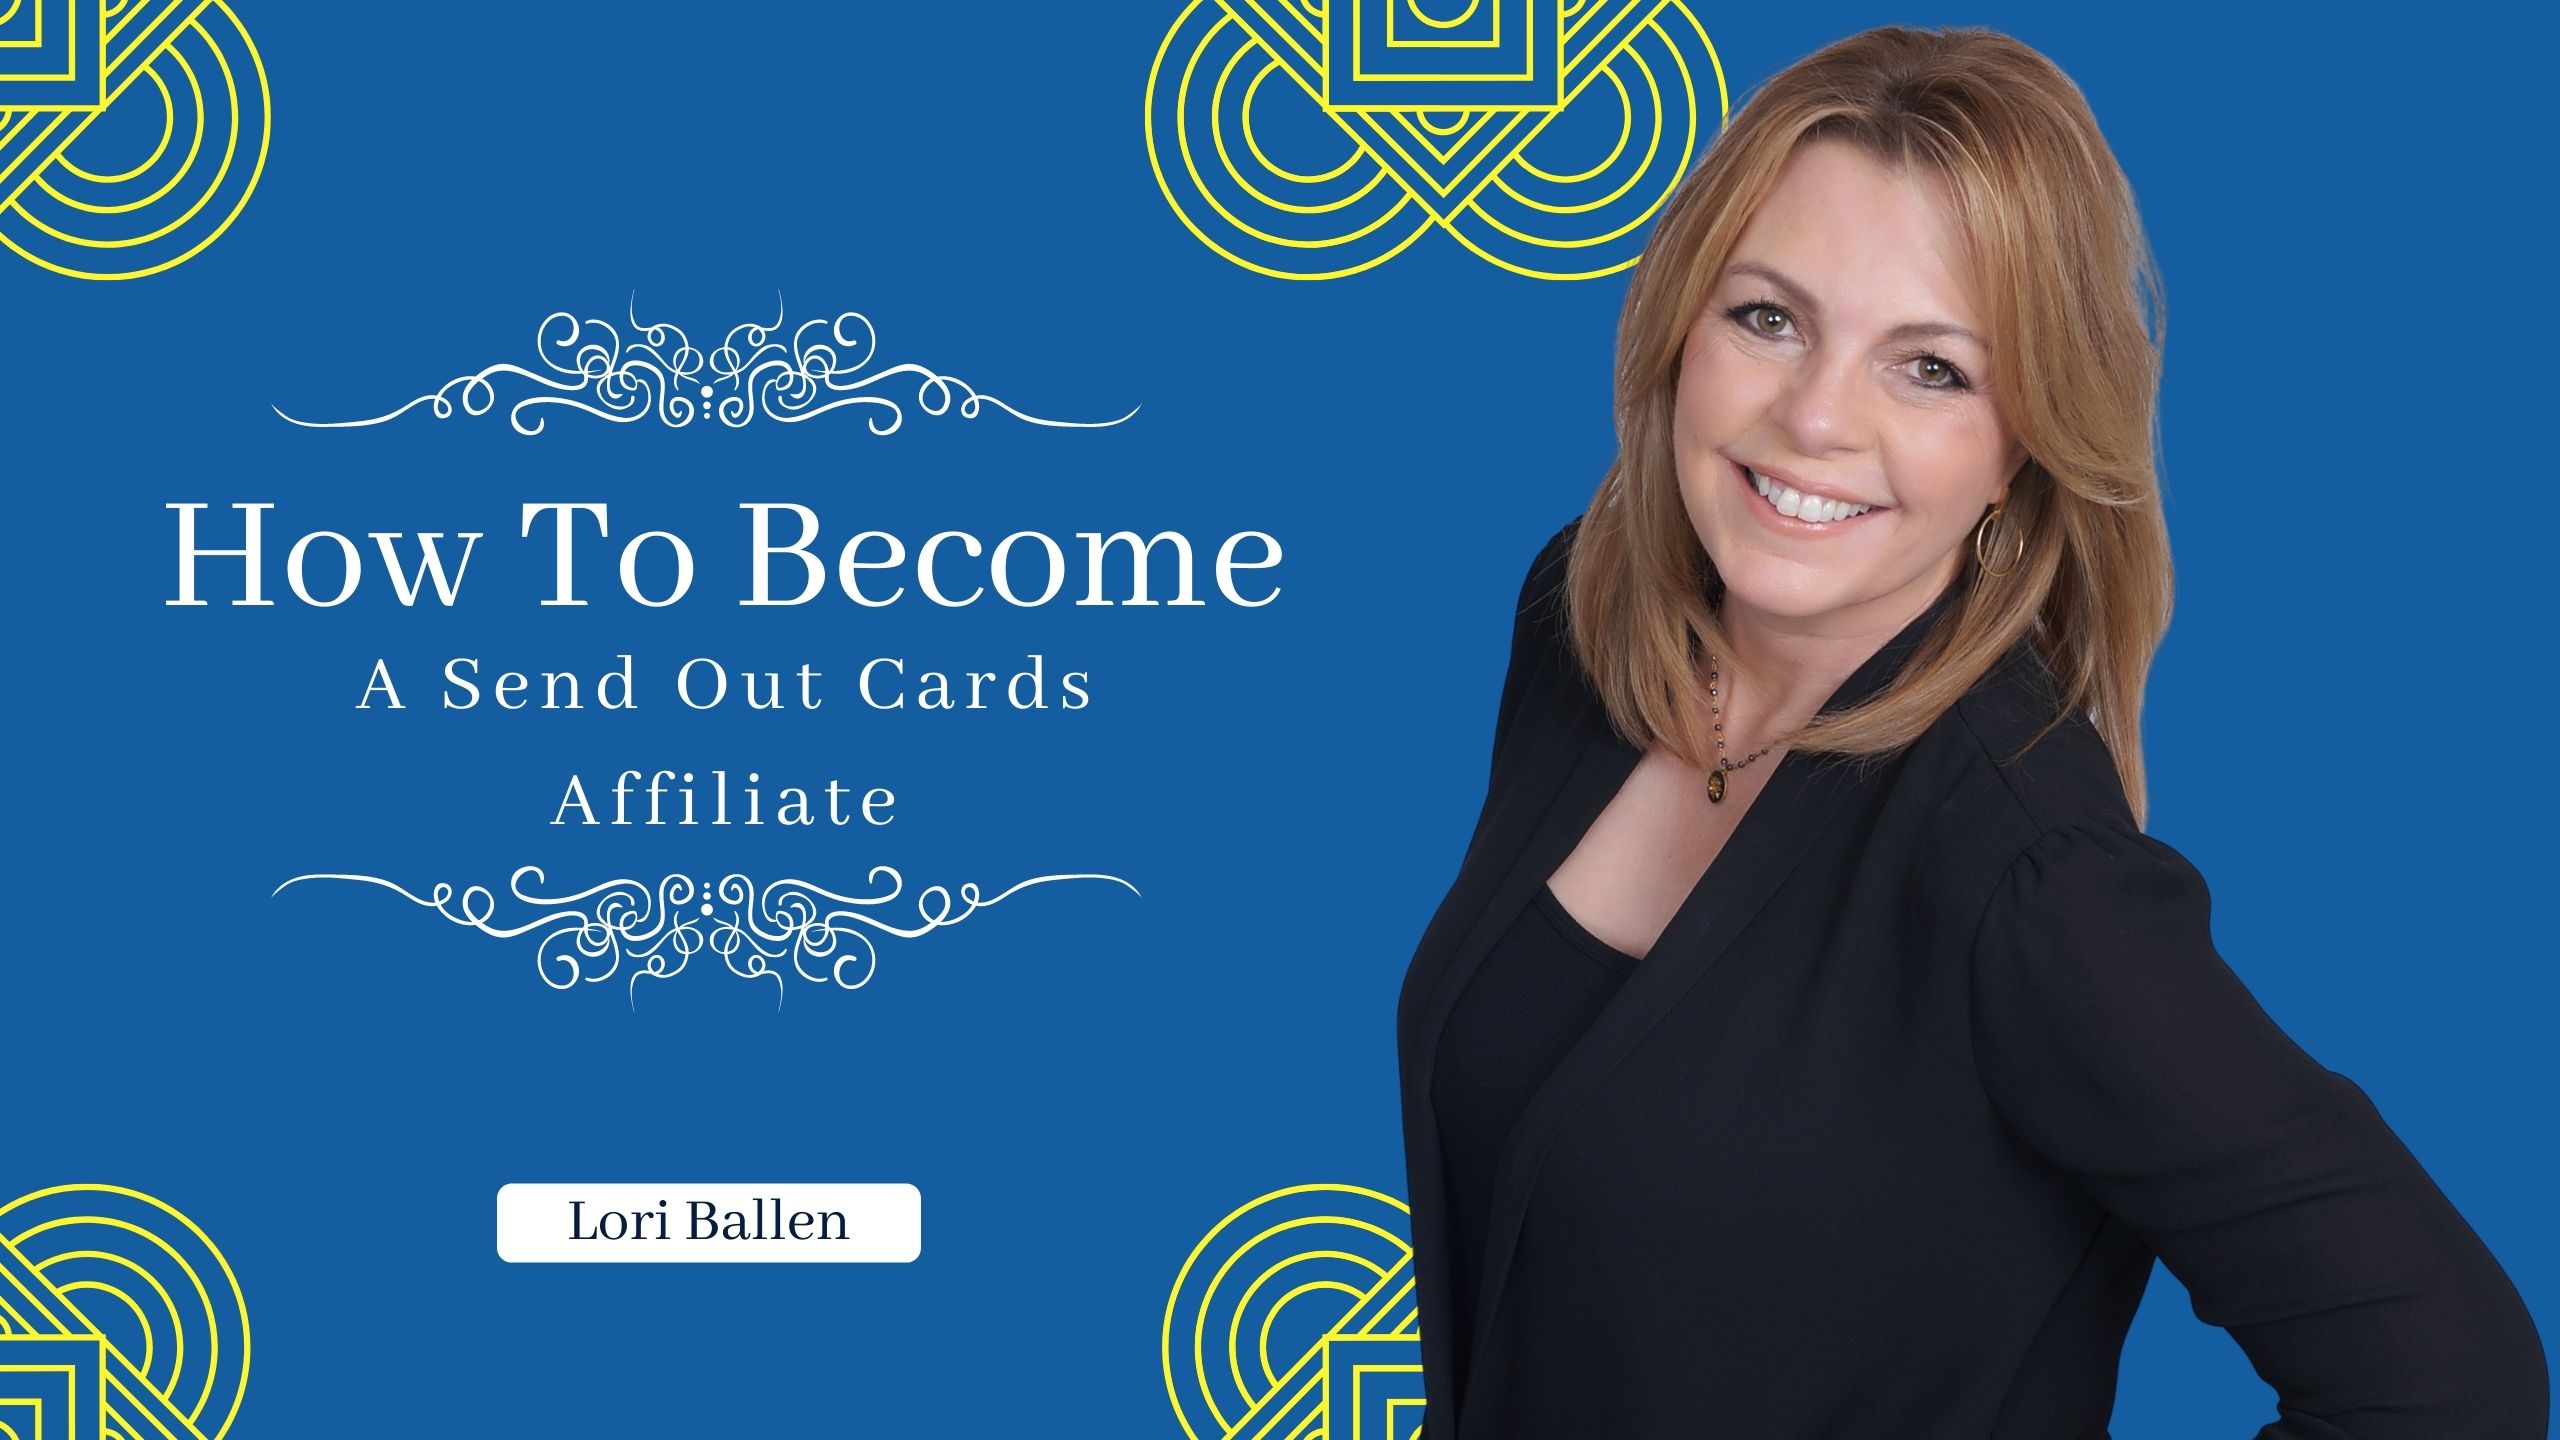 How To Become a Send Out Cards Affiliate